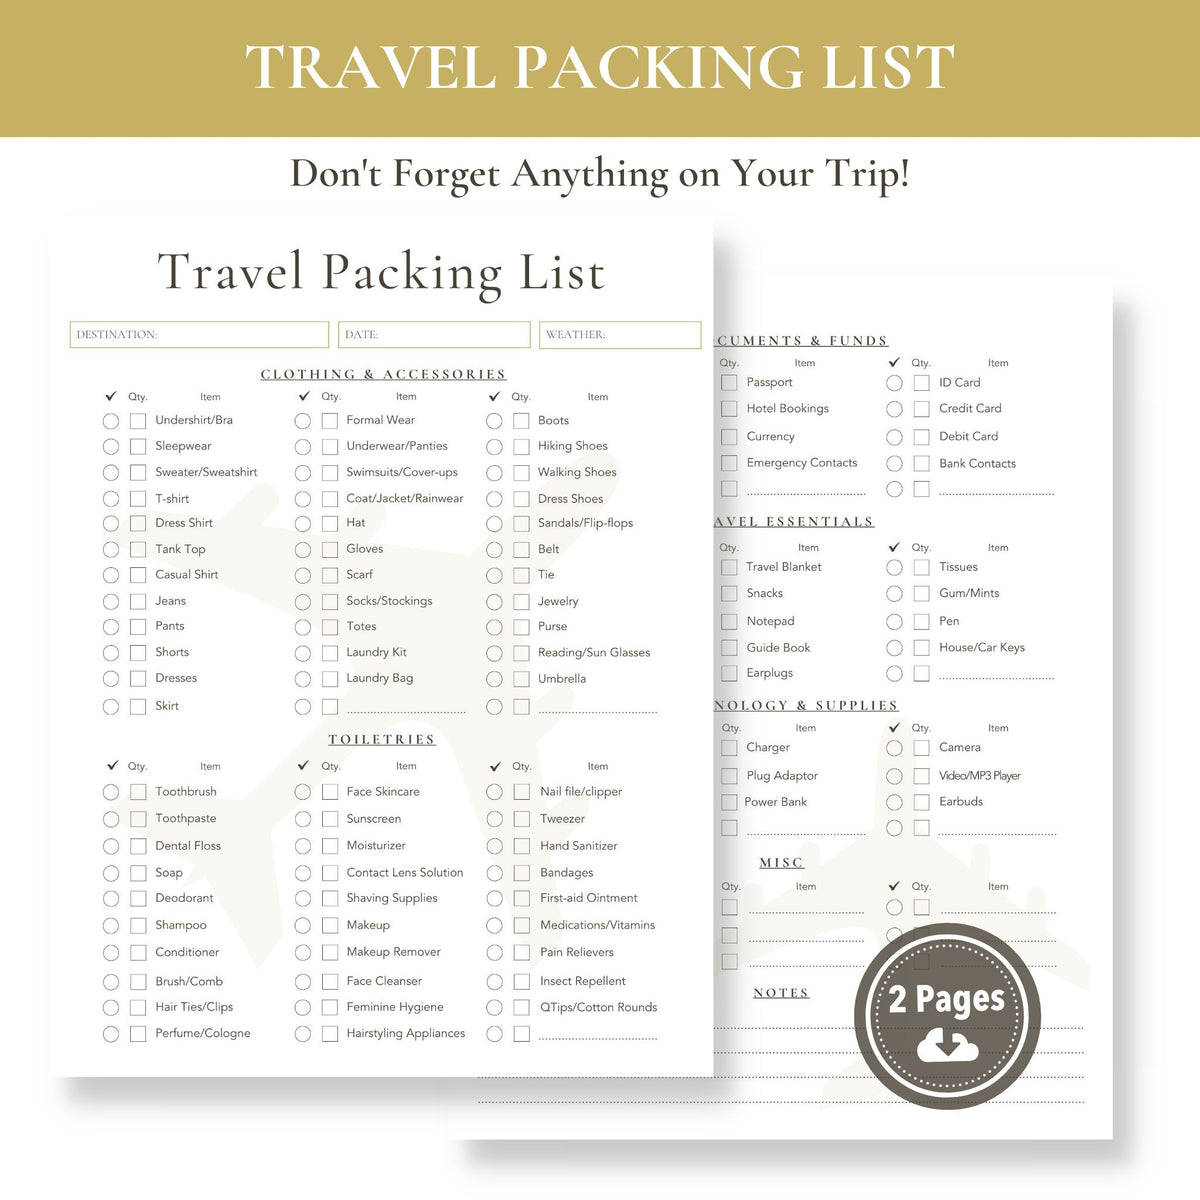 Travel Packing Checklist - Your Ultimate Packing Guide at SOTC